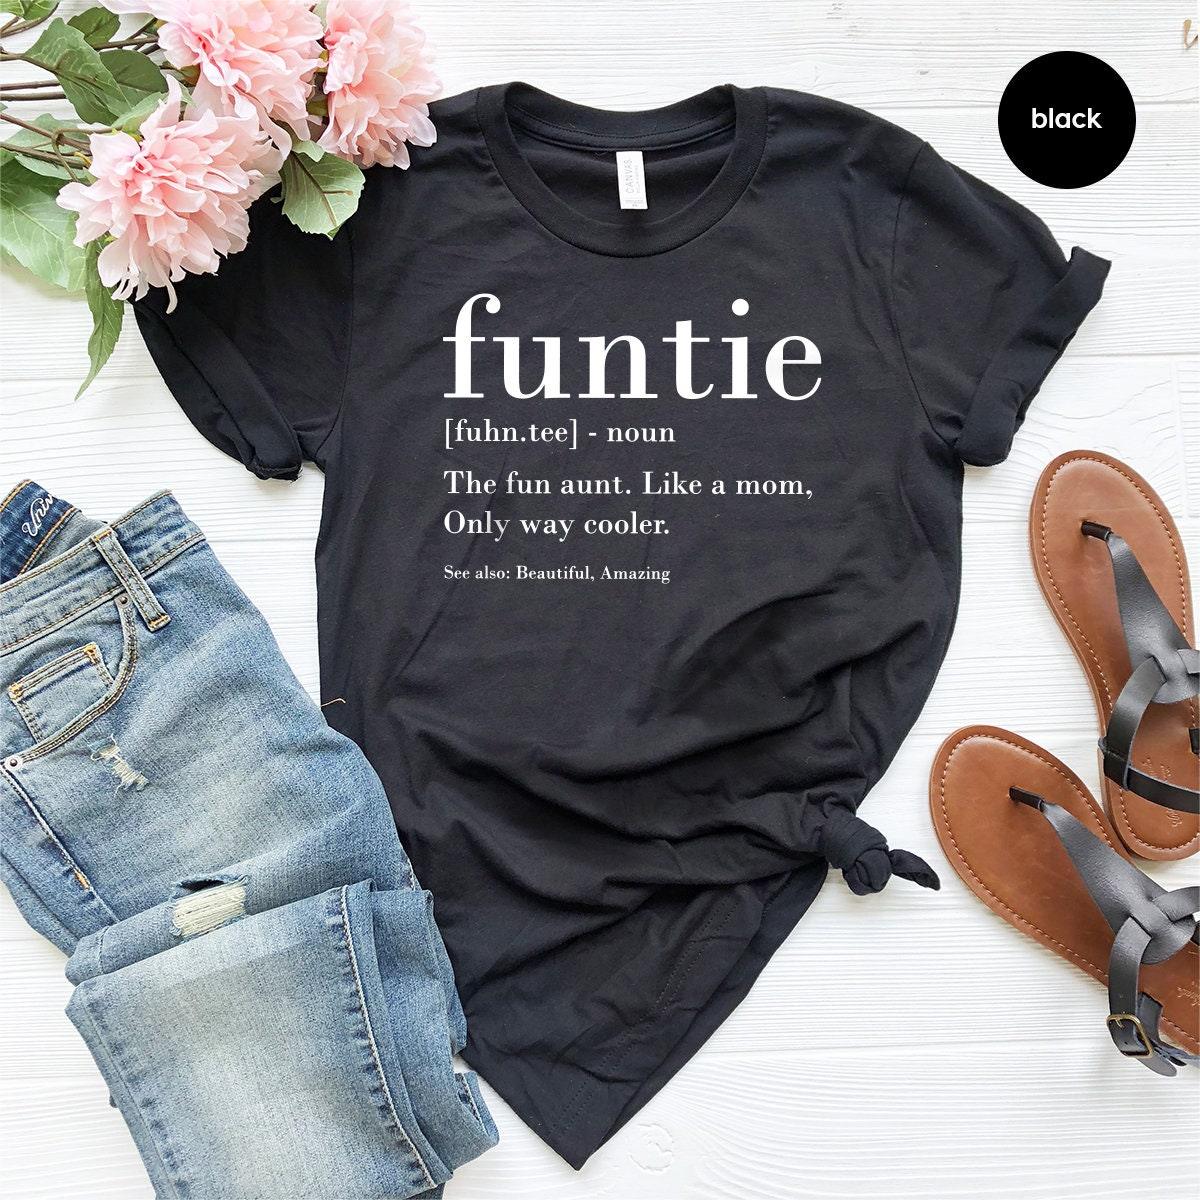 Aunt TShirt, Auntie T Shirt, Funtie Shirt, Funtie Definition Shirt,  Mother's Day Gifts, The Fun Aunt Like Mom Only Way Cooler Tee - Fastdeliverytees.com